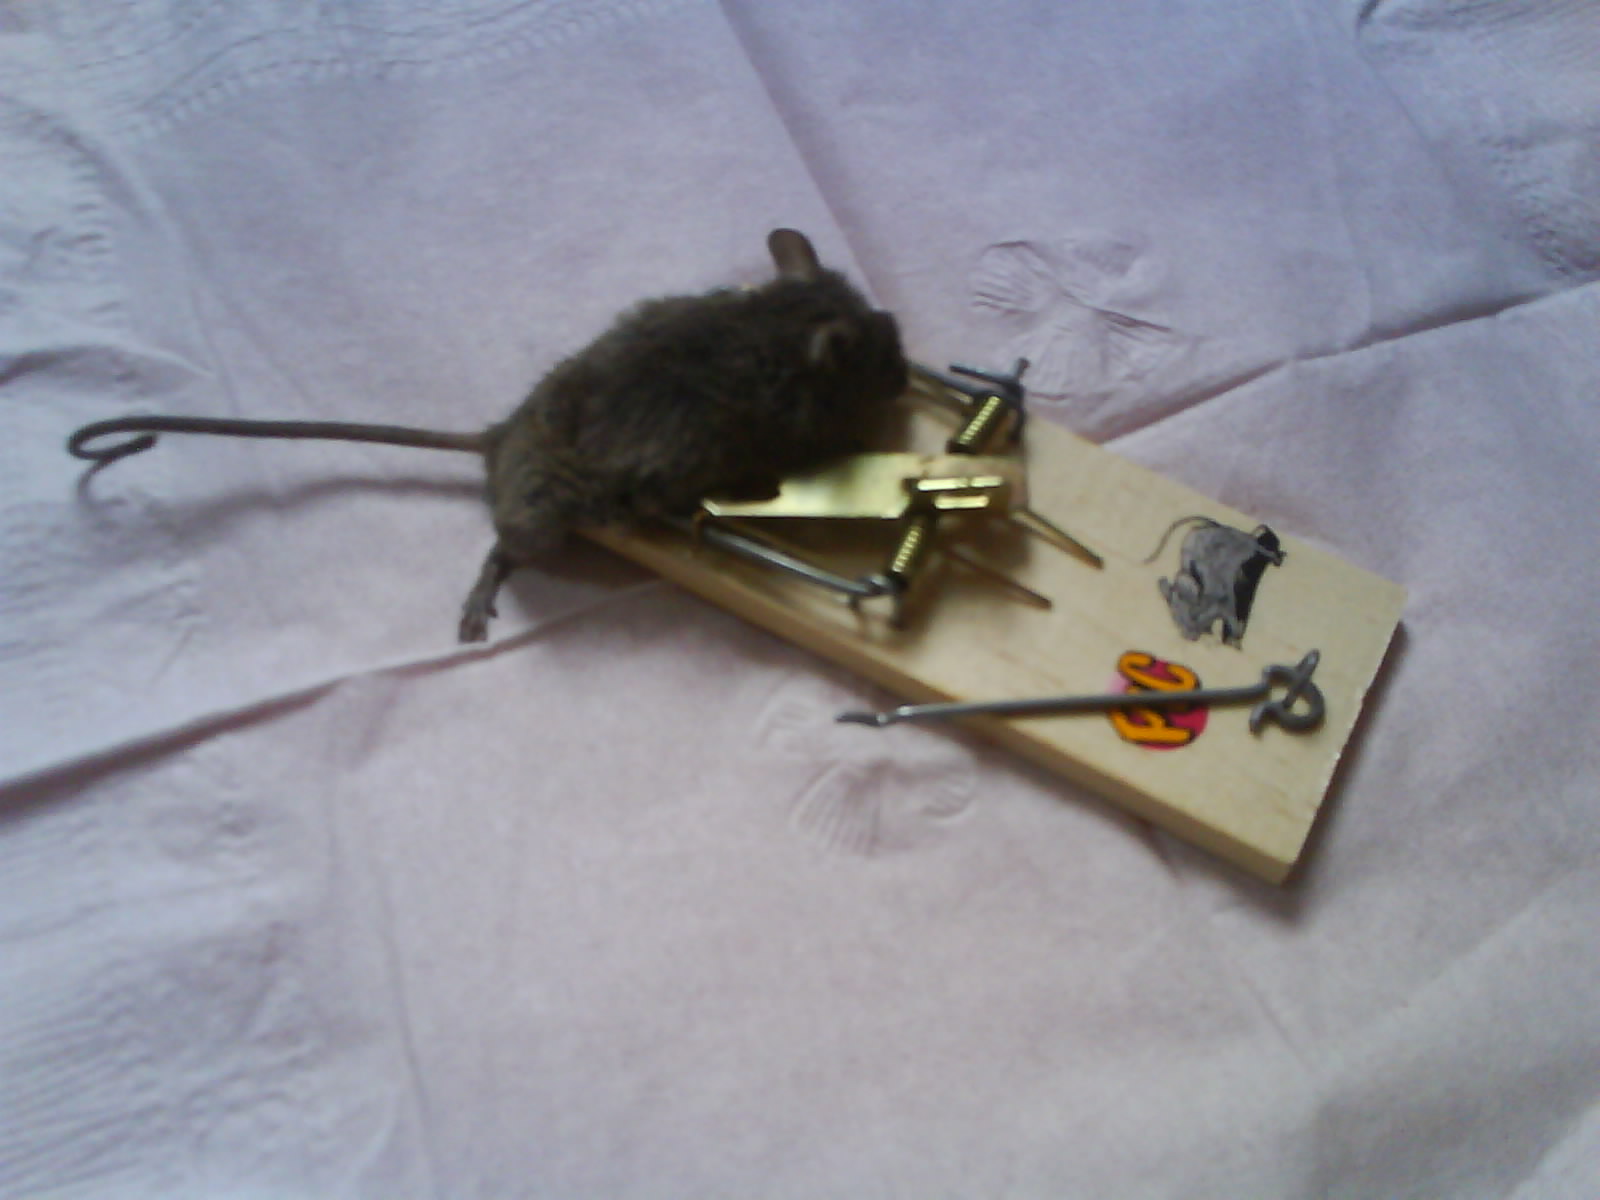 small rodent on board, playing with some small tools